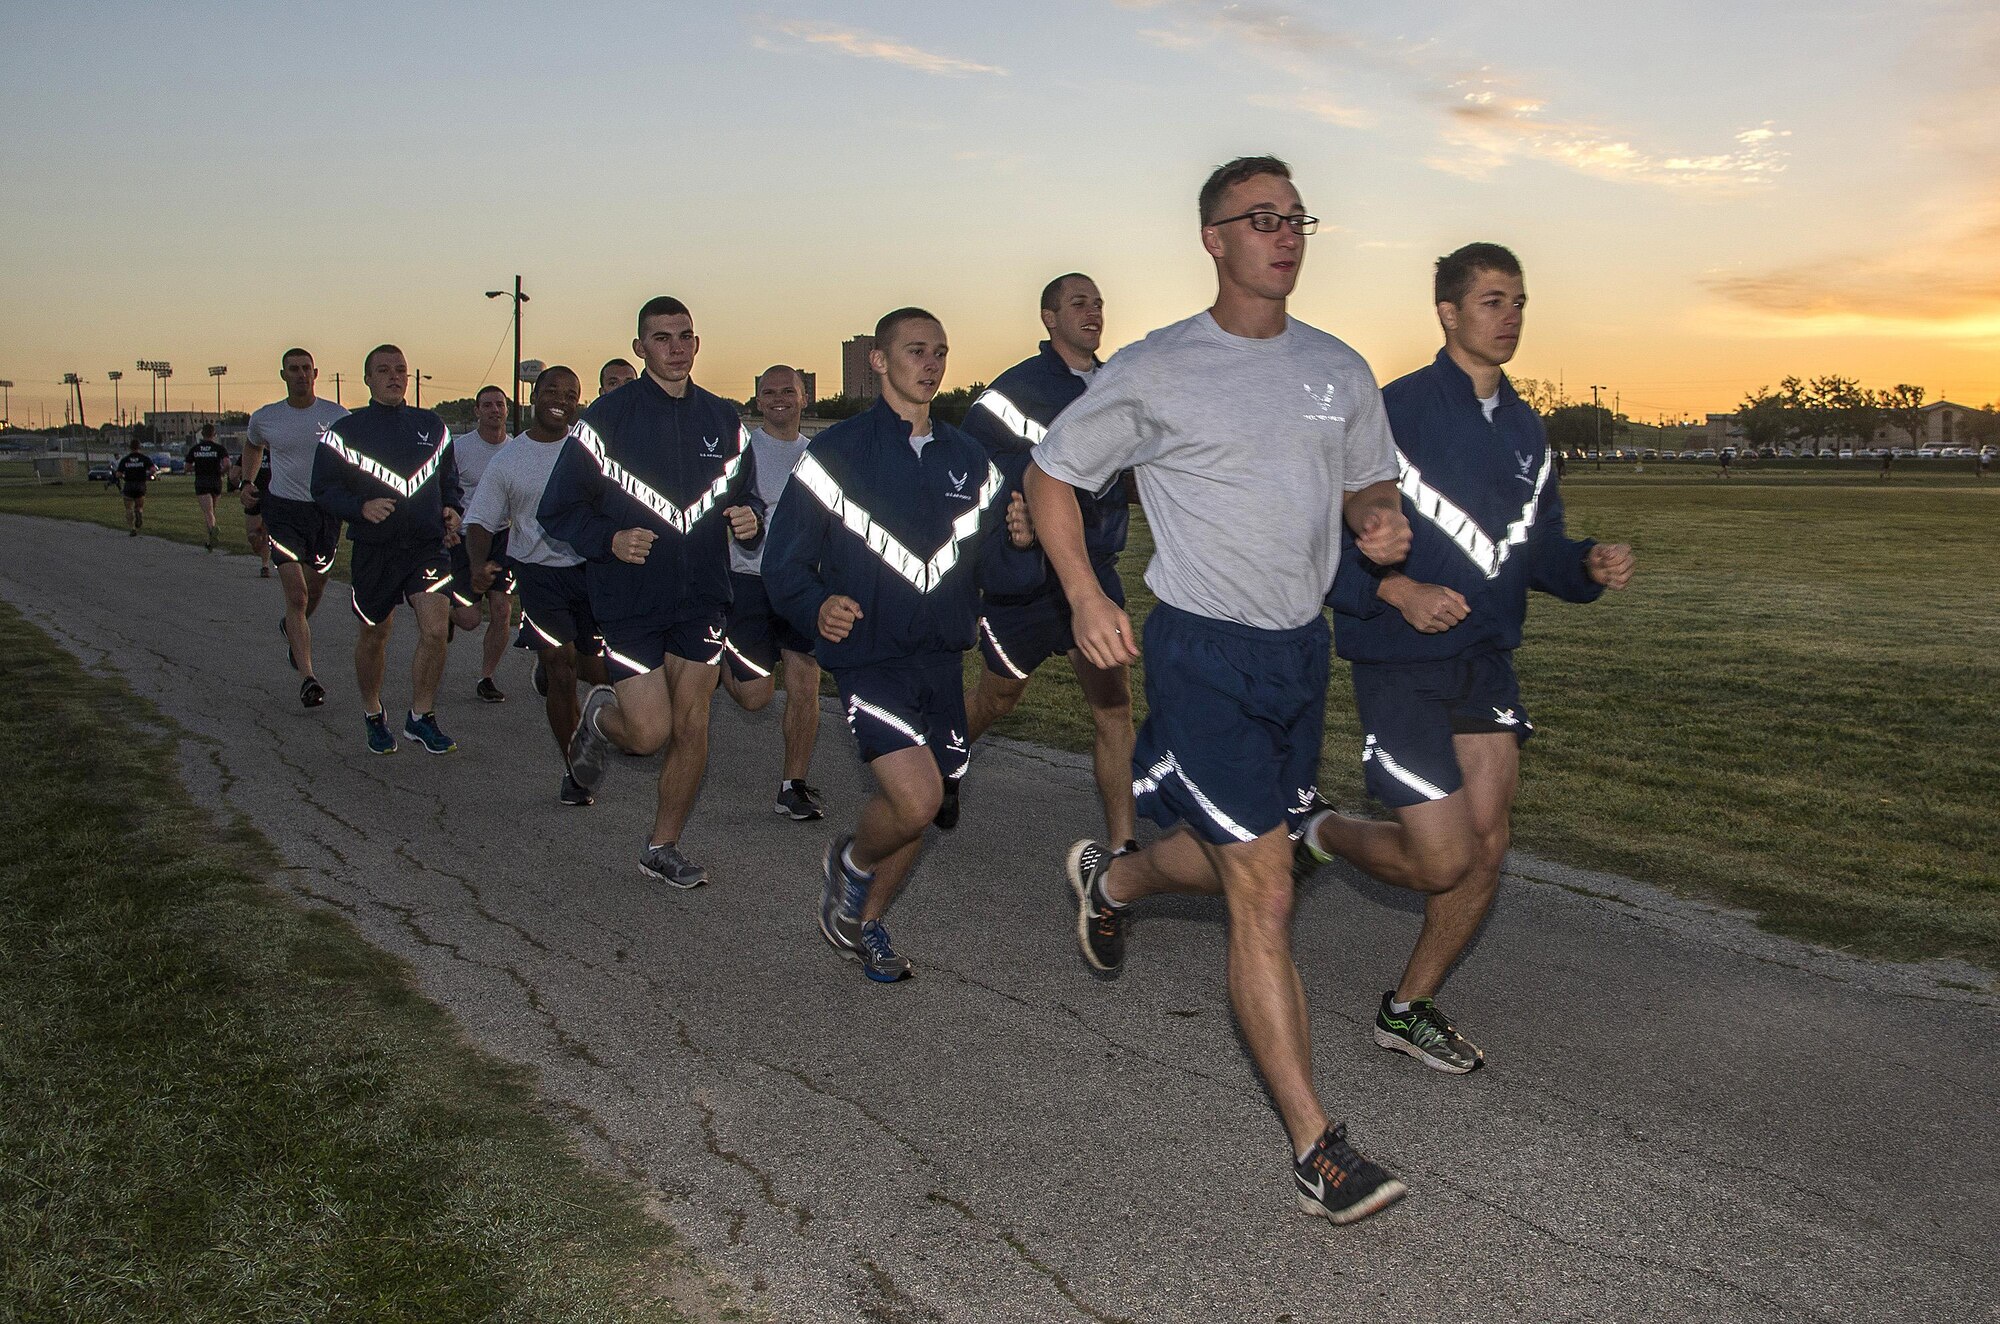 Members of the 350th Battlefield Airmen Training Squadron and Airmen from throughout Joint Base San Antonio-Lackland complete a run during a memorial remembrance ceremony honoring Lt. Col. William “Bill” Schroeder April 7, 2017, at JBSA-Lackland, Texas, Medina Annex. Schroeder’s unit honored his legacy by renaming a drop zone as Schroeder DZ and participated in a "Monster Mash" fitness competition, remembrance ceremony and log march. On April 8th, 2016 Schroeder recognized a perilous situation developing and reacted swiftly by putting himself between an armed individual and his first sergeant. In the process, he saved lives of other squadron members while being fatally wounded. Schroeder was posthumously awarded the Airman’s Medal, given to those that distinguish themselves by a heroic act – usually at the volunteer risk of their lives but not involving combat.  (U.S. Air Force photo by Johnny Saldivar)